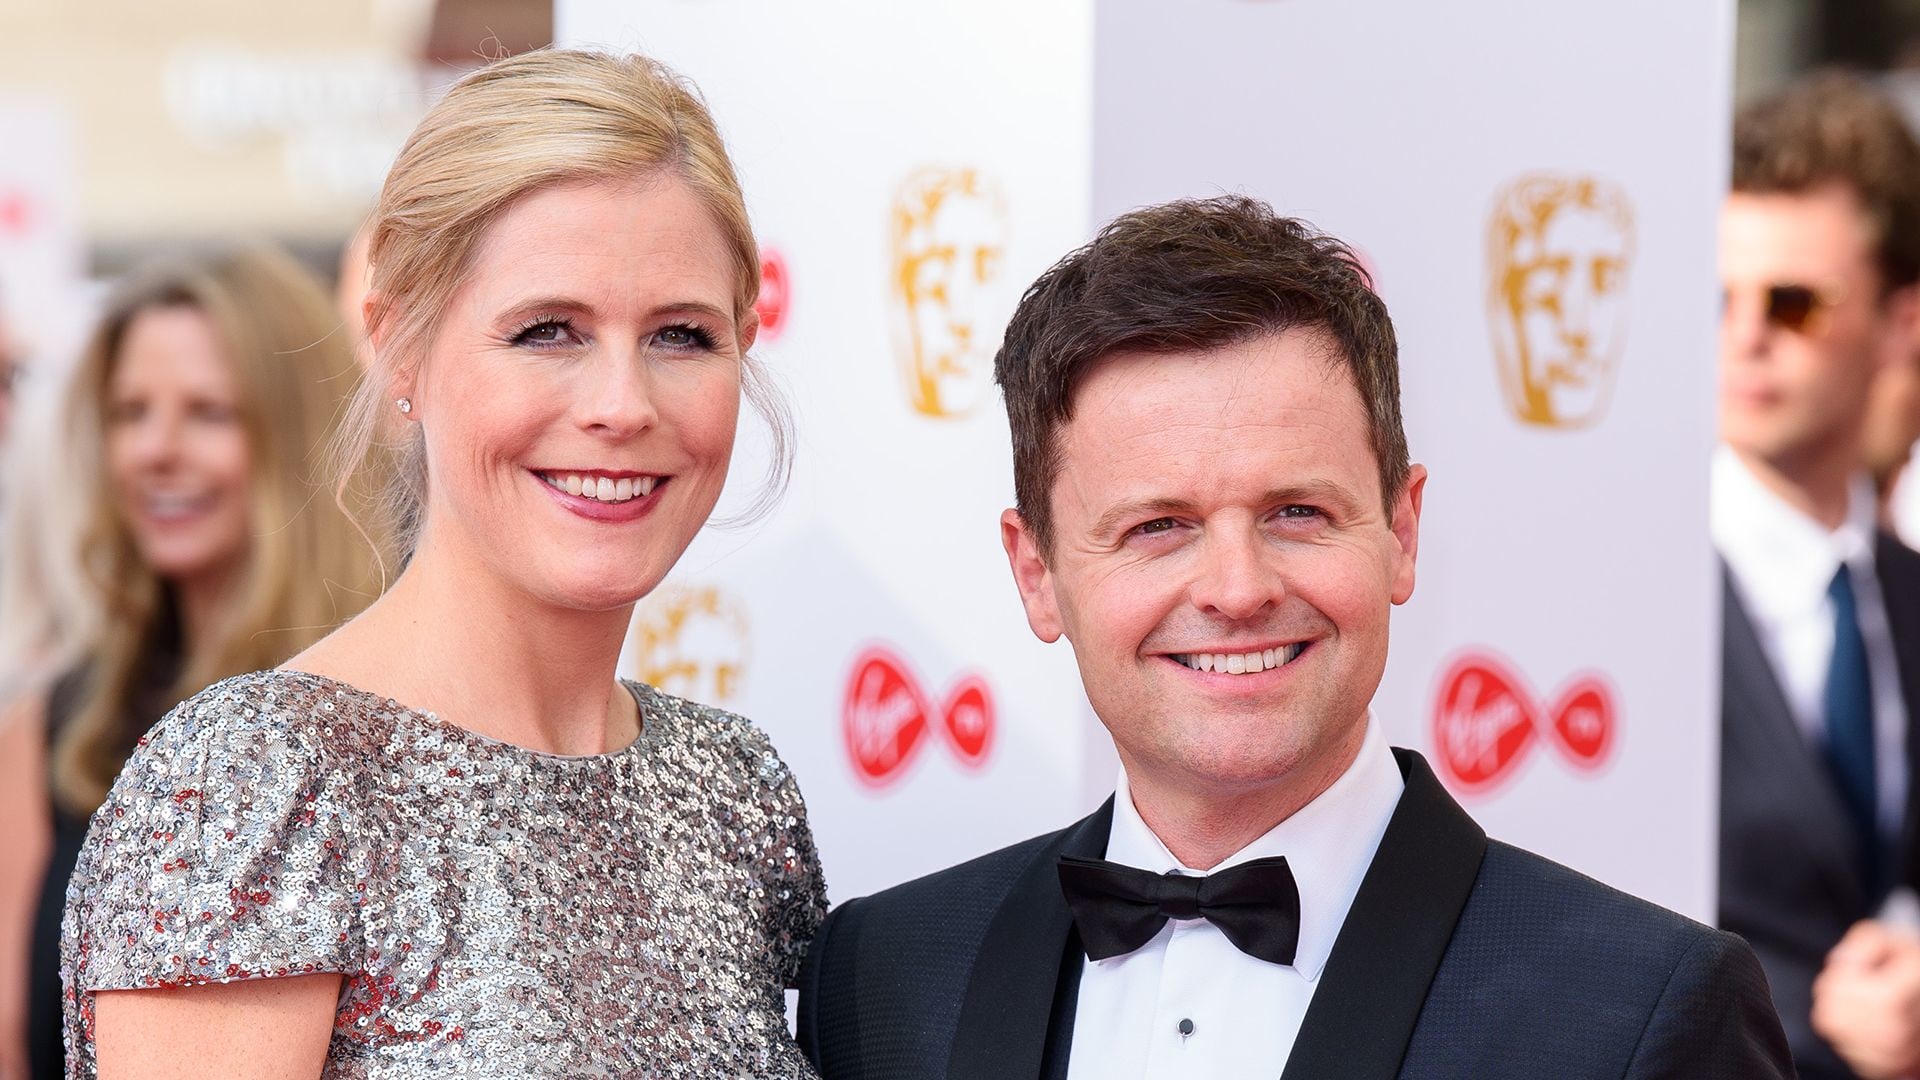 Ali Astall and Declan Donnelly on the BAFTA red carpet